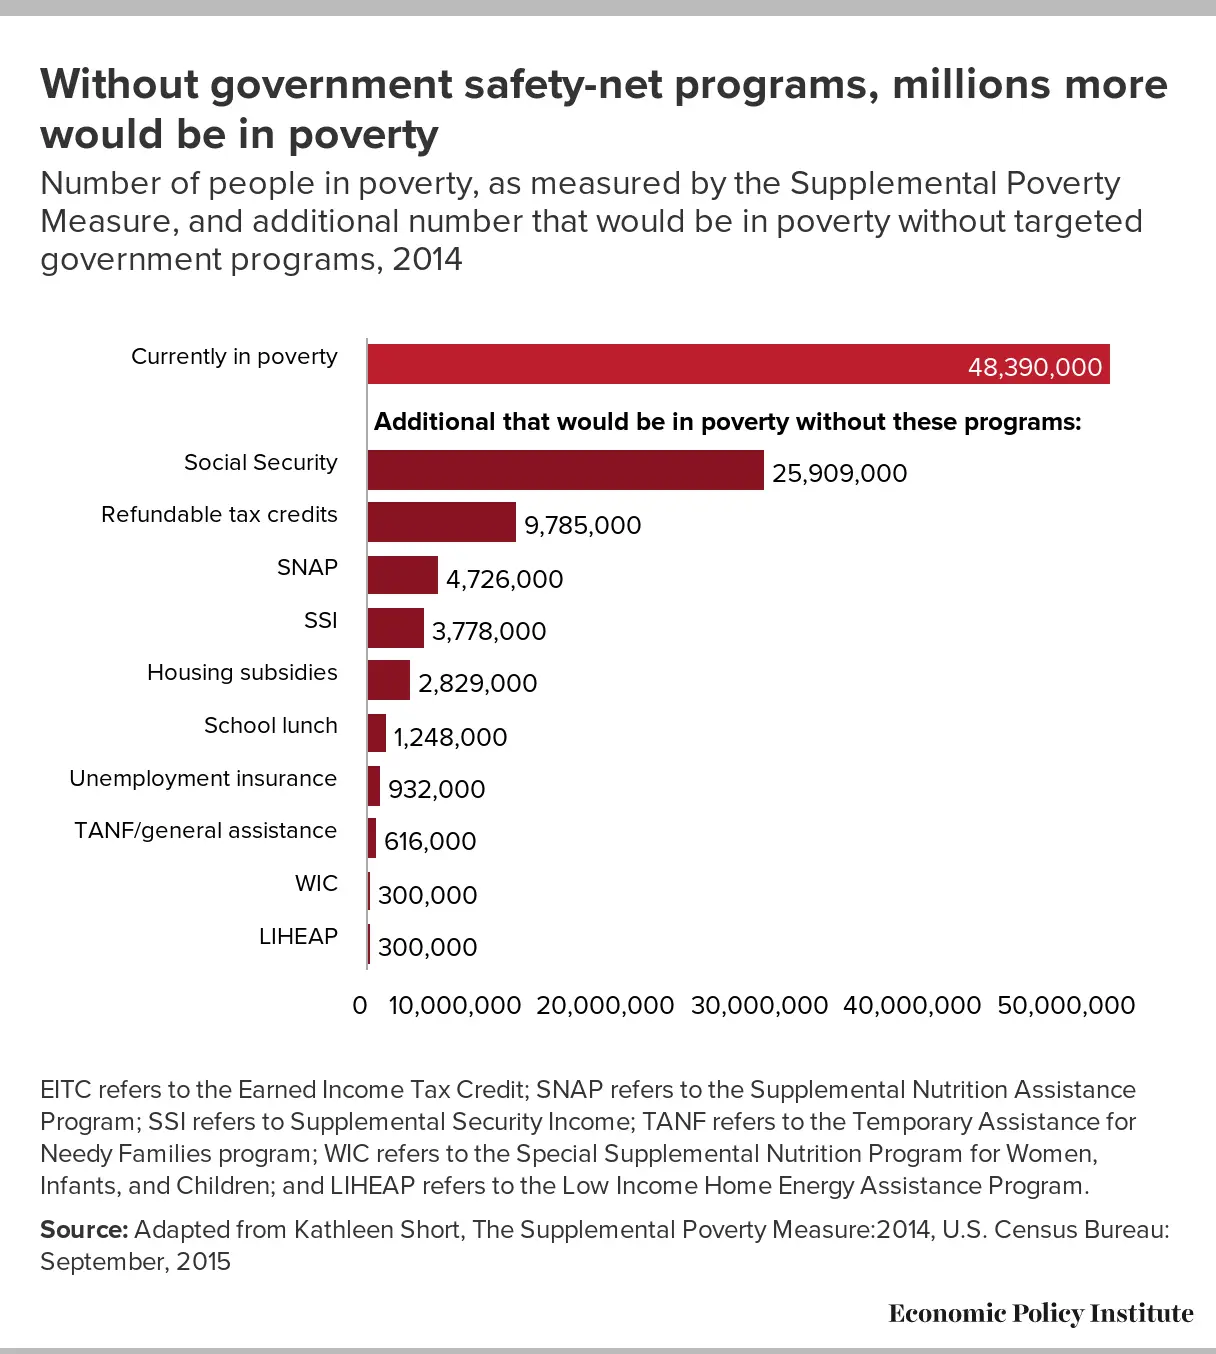 The U.S. Government Programs Keeping Millions Out of Poverty